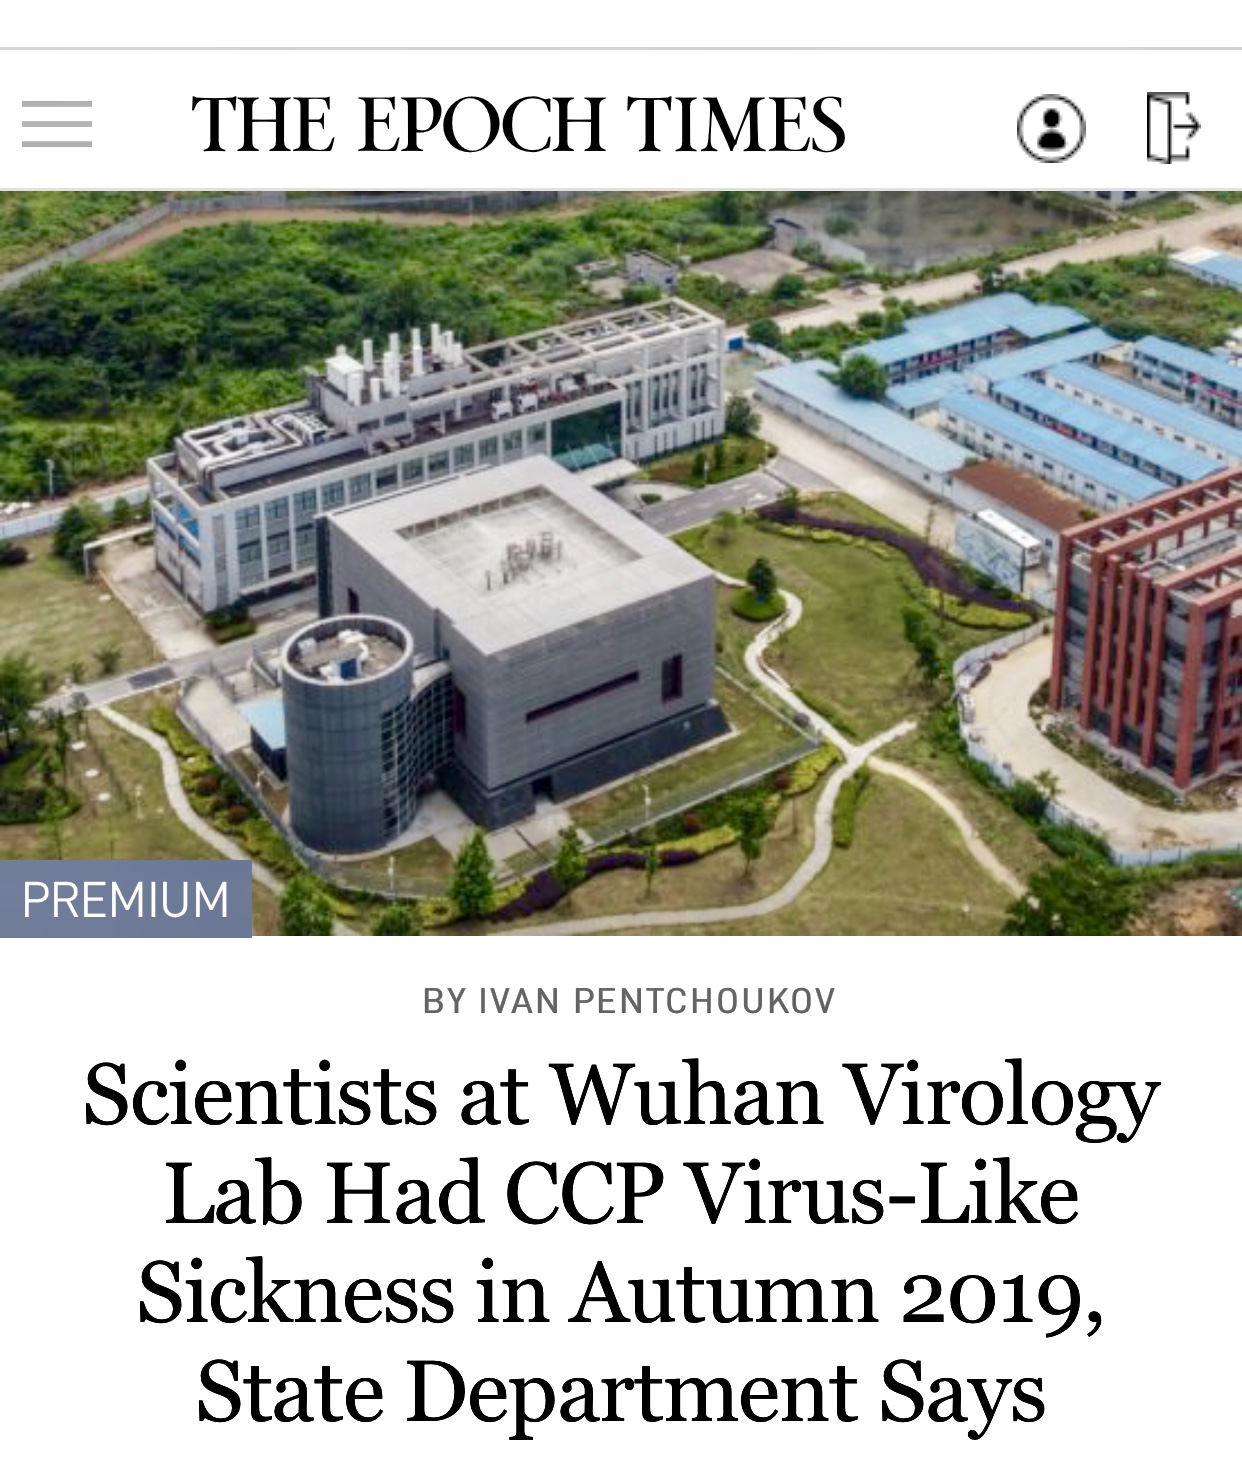 Scientists at Wuhan Virology Lab Had CCP Virus-Like Sickness in Autumn 2019, State Department Says